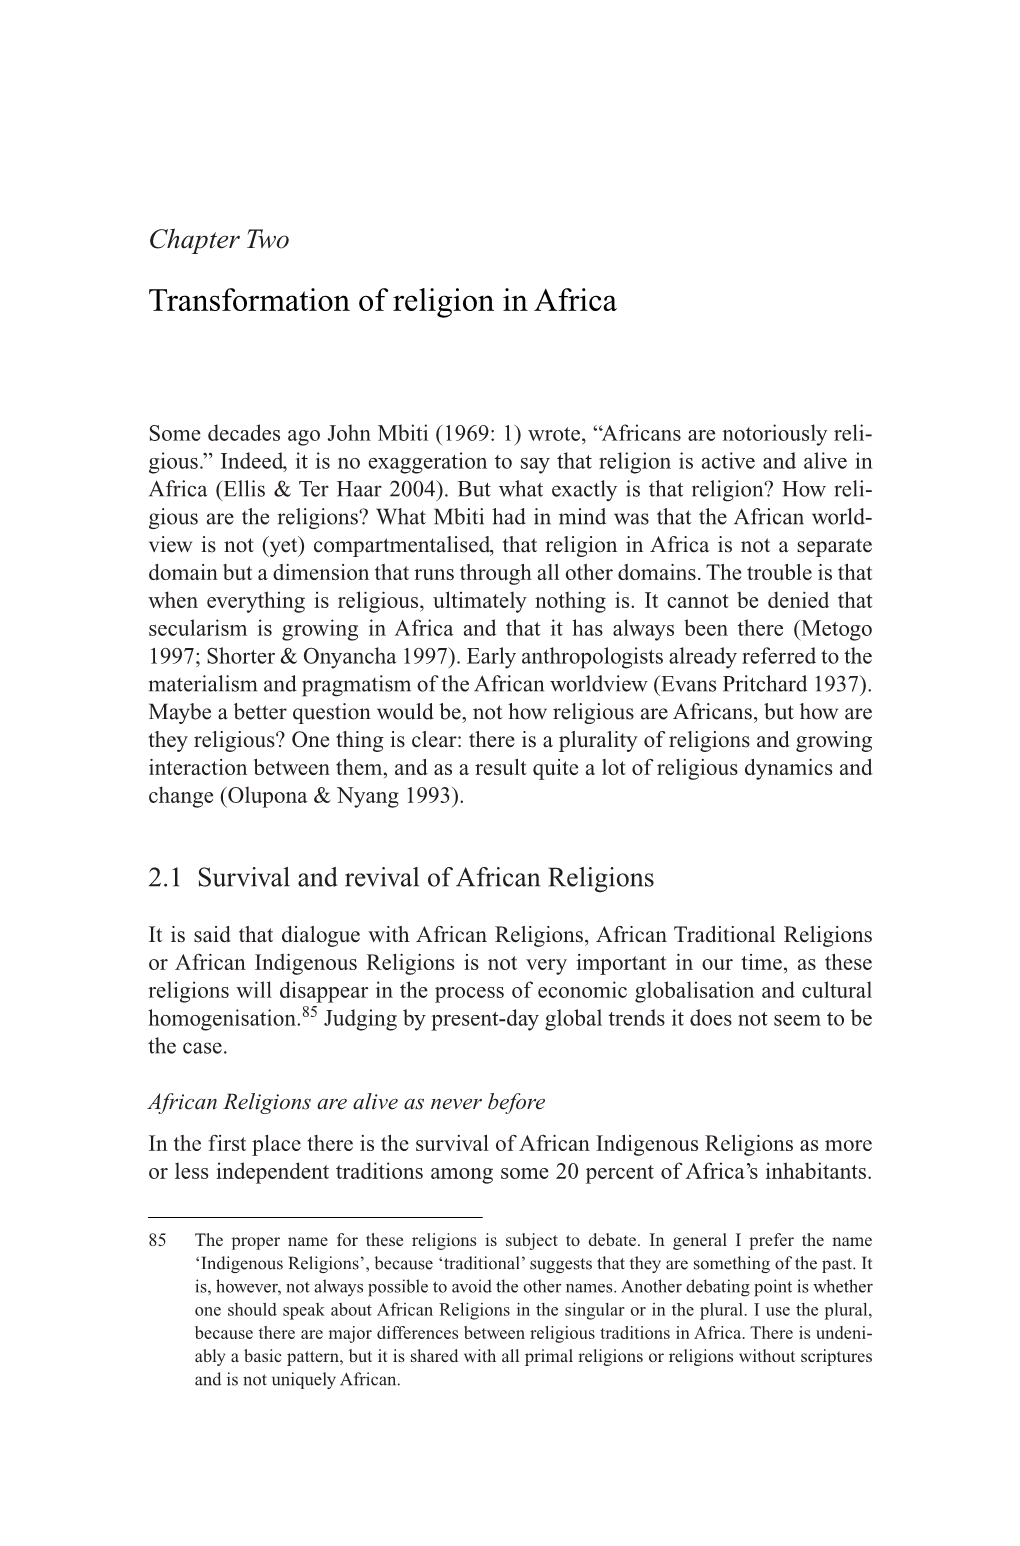 Transformation of Religion in Africa